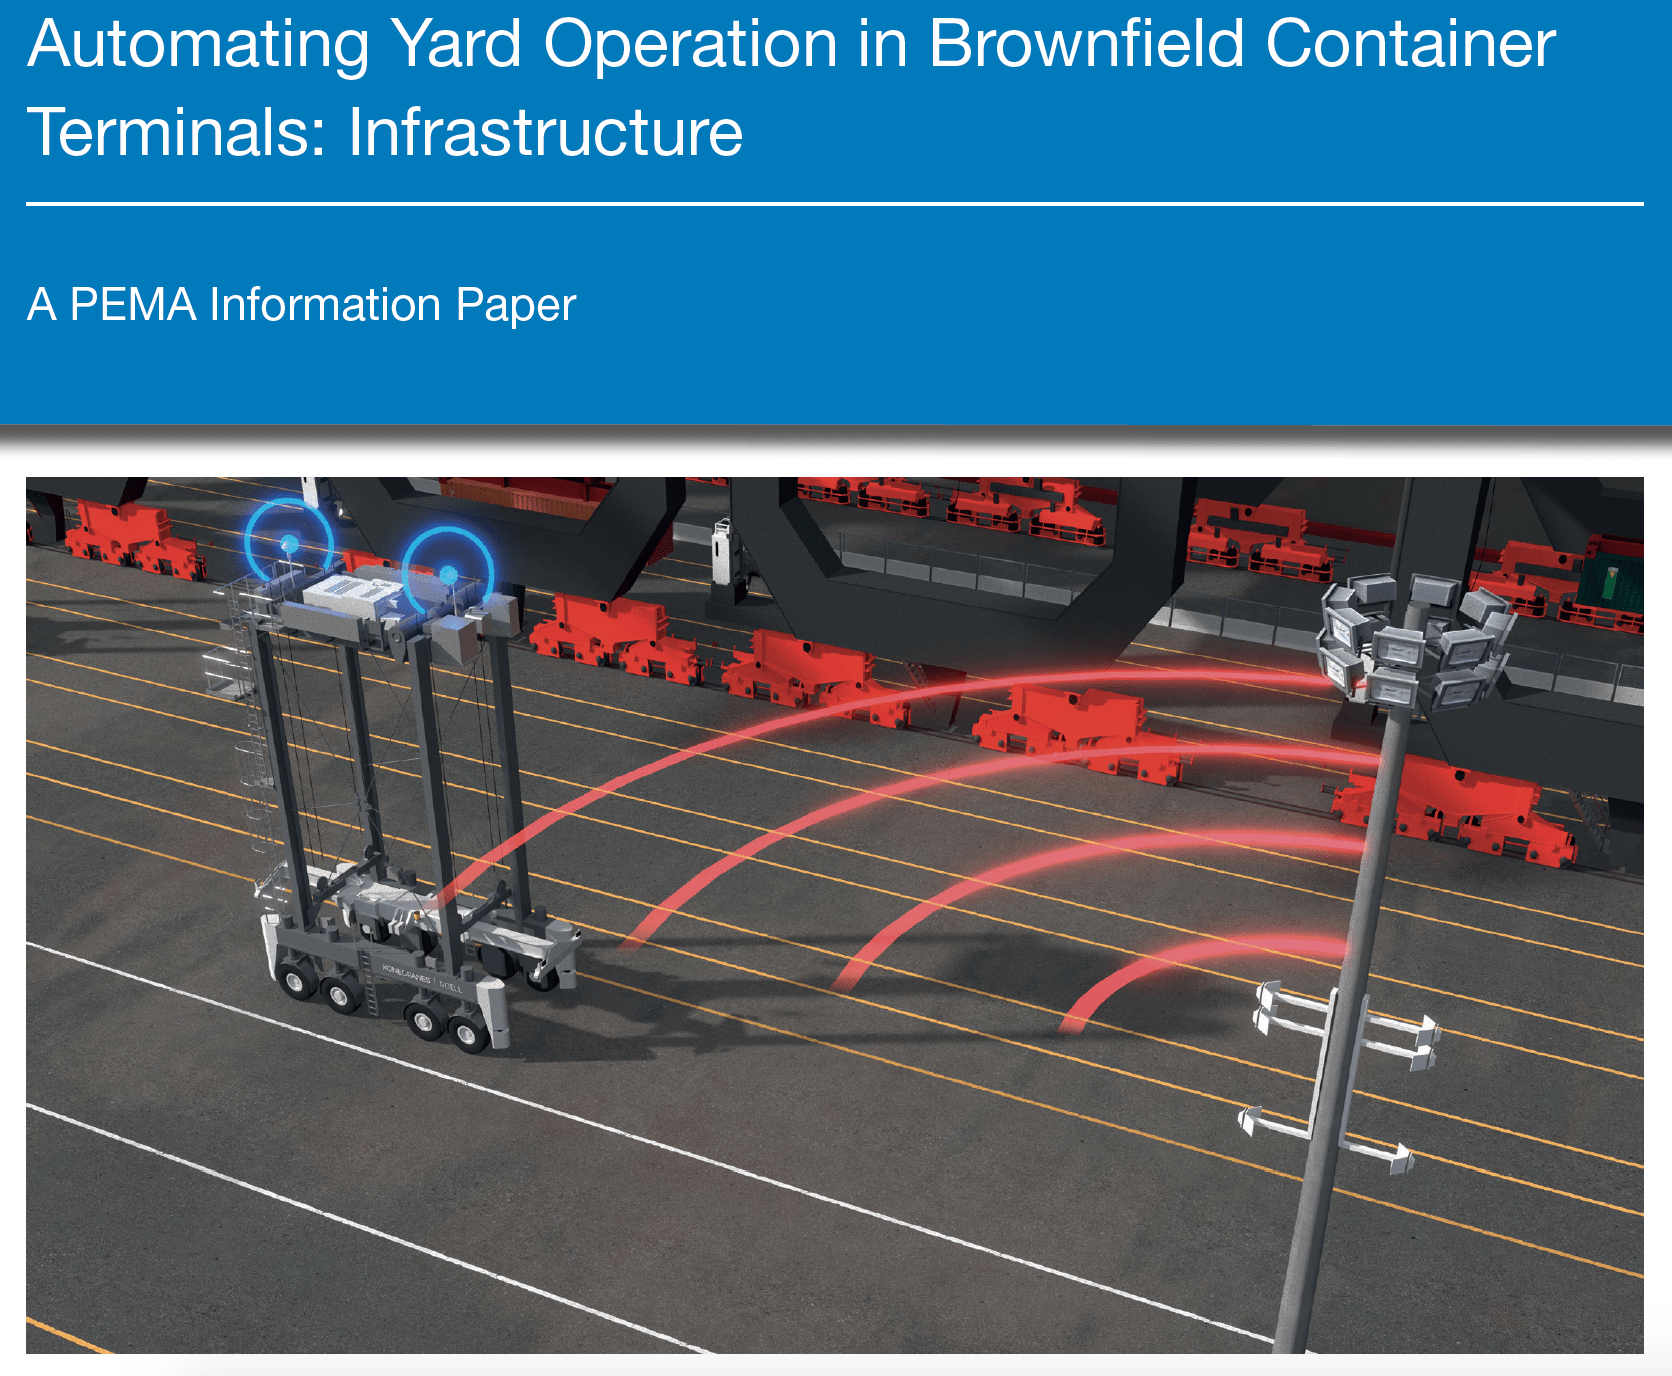 PEMA publishes brownfield automation information paper